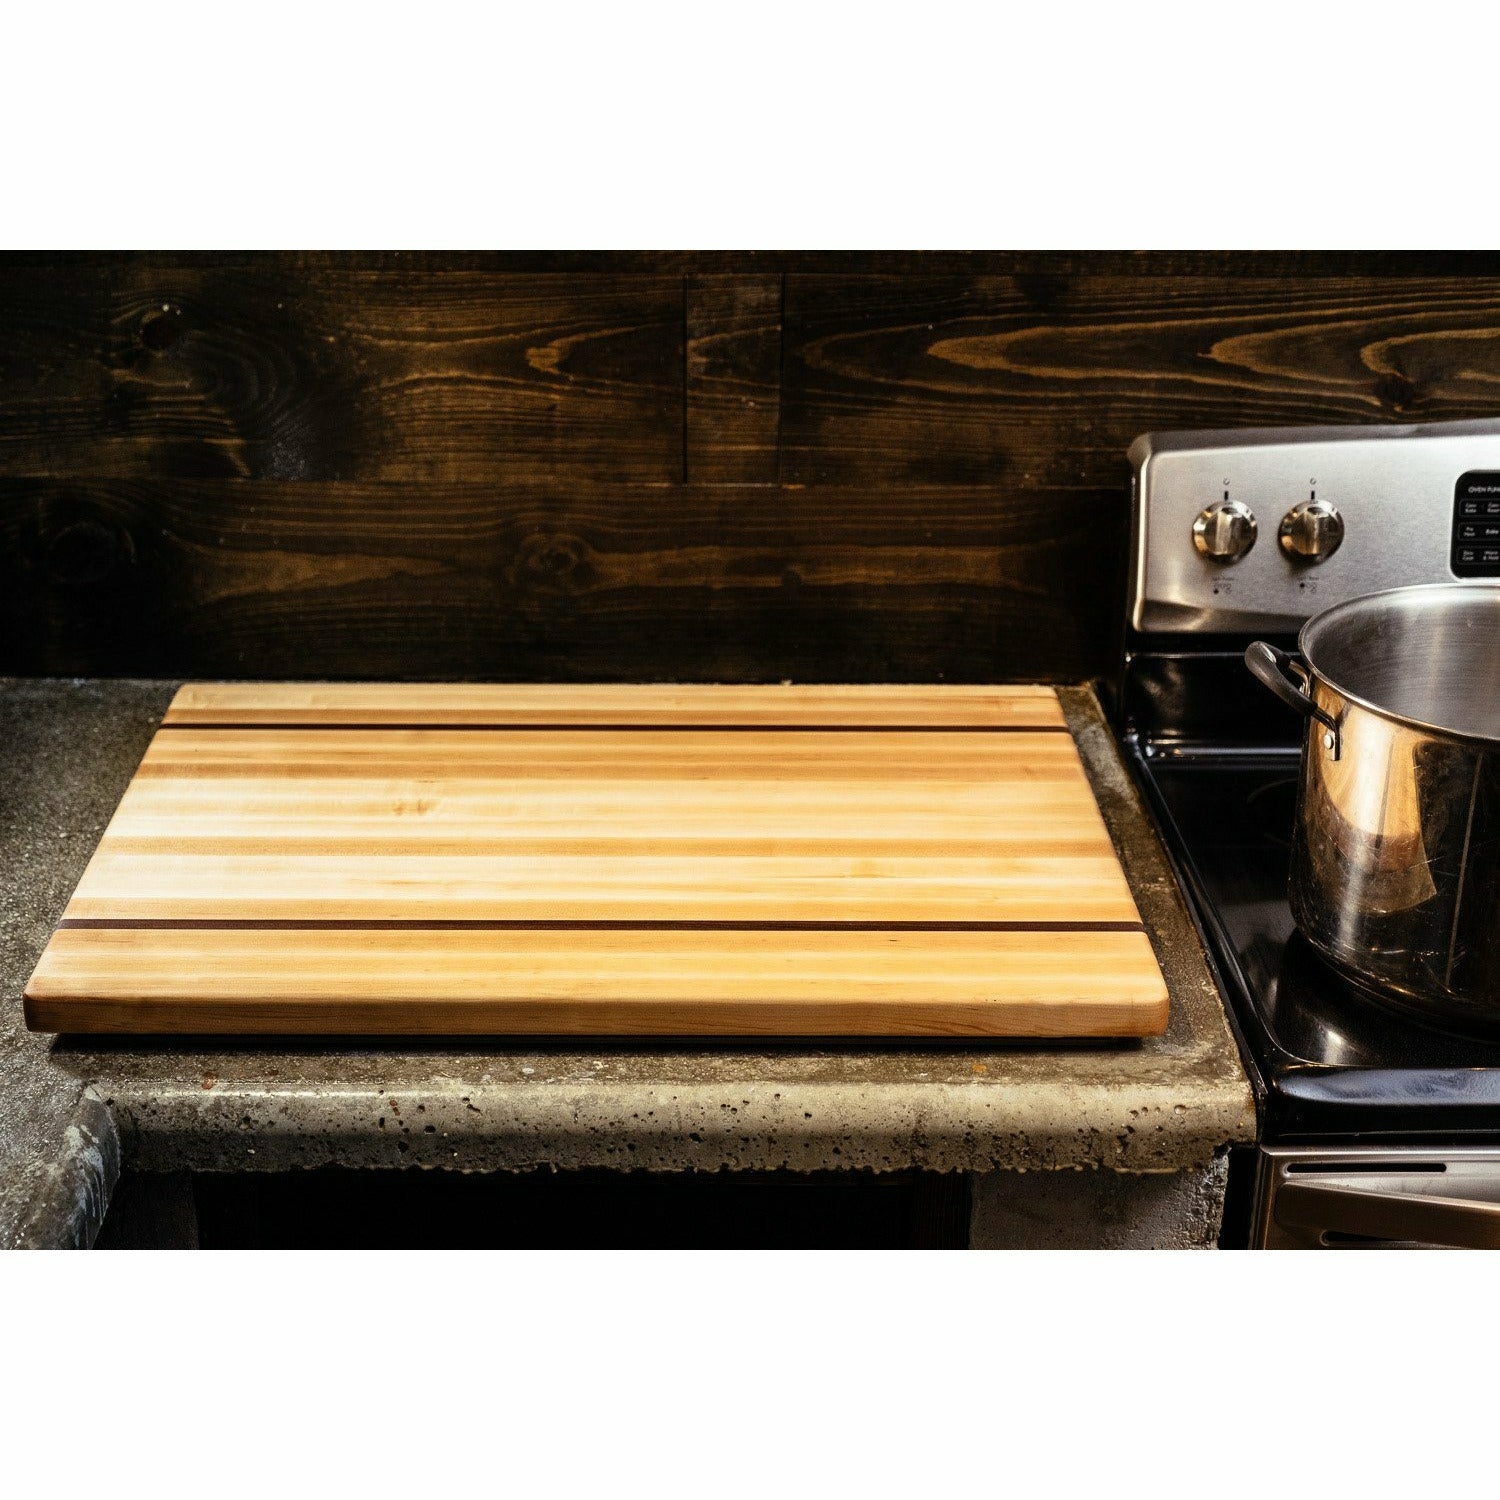 Bamboo Wooden Gas Stove Top Covers and Cutting Board Electric or Gas Stove  Cover